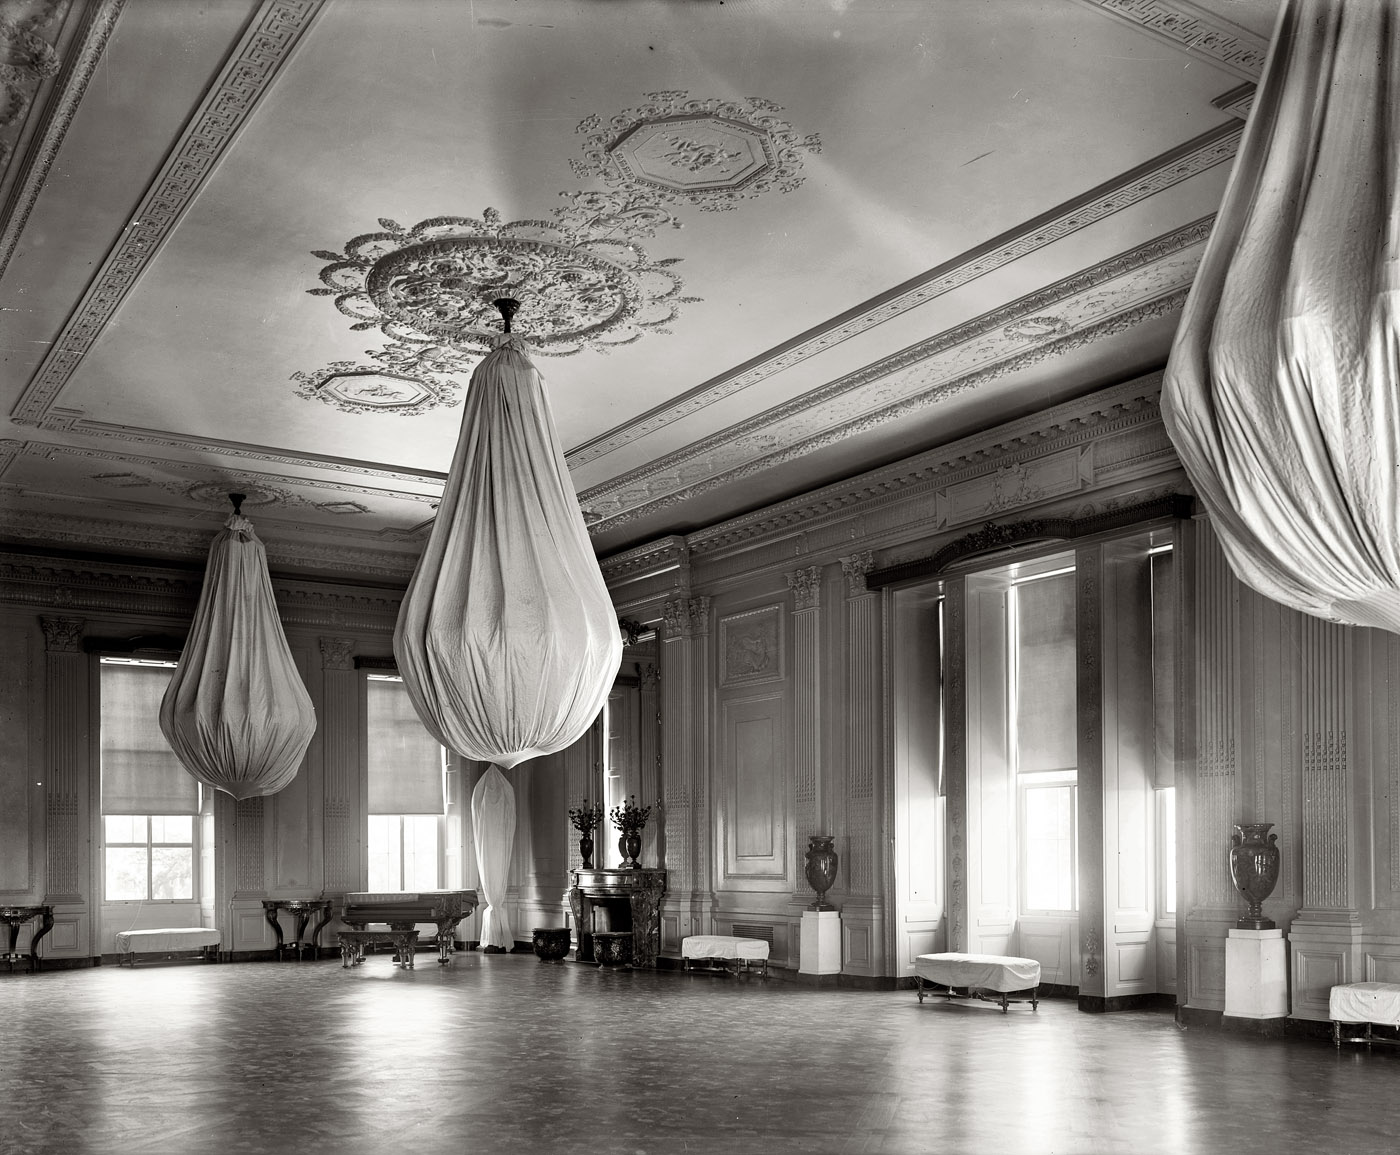 East Room of the White House circa 1920. View full size. National Photo Co.